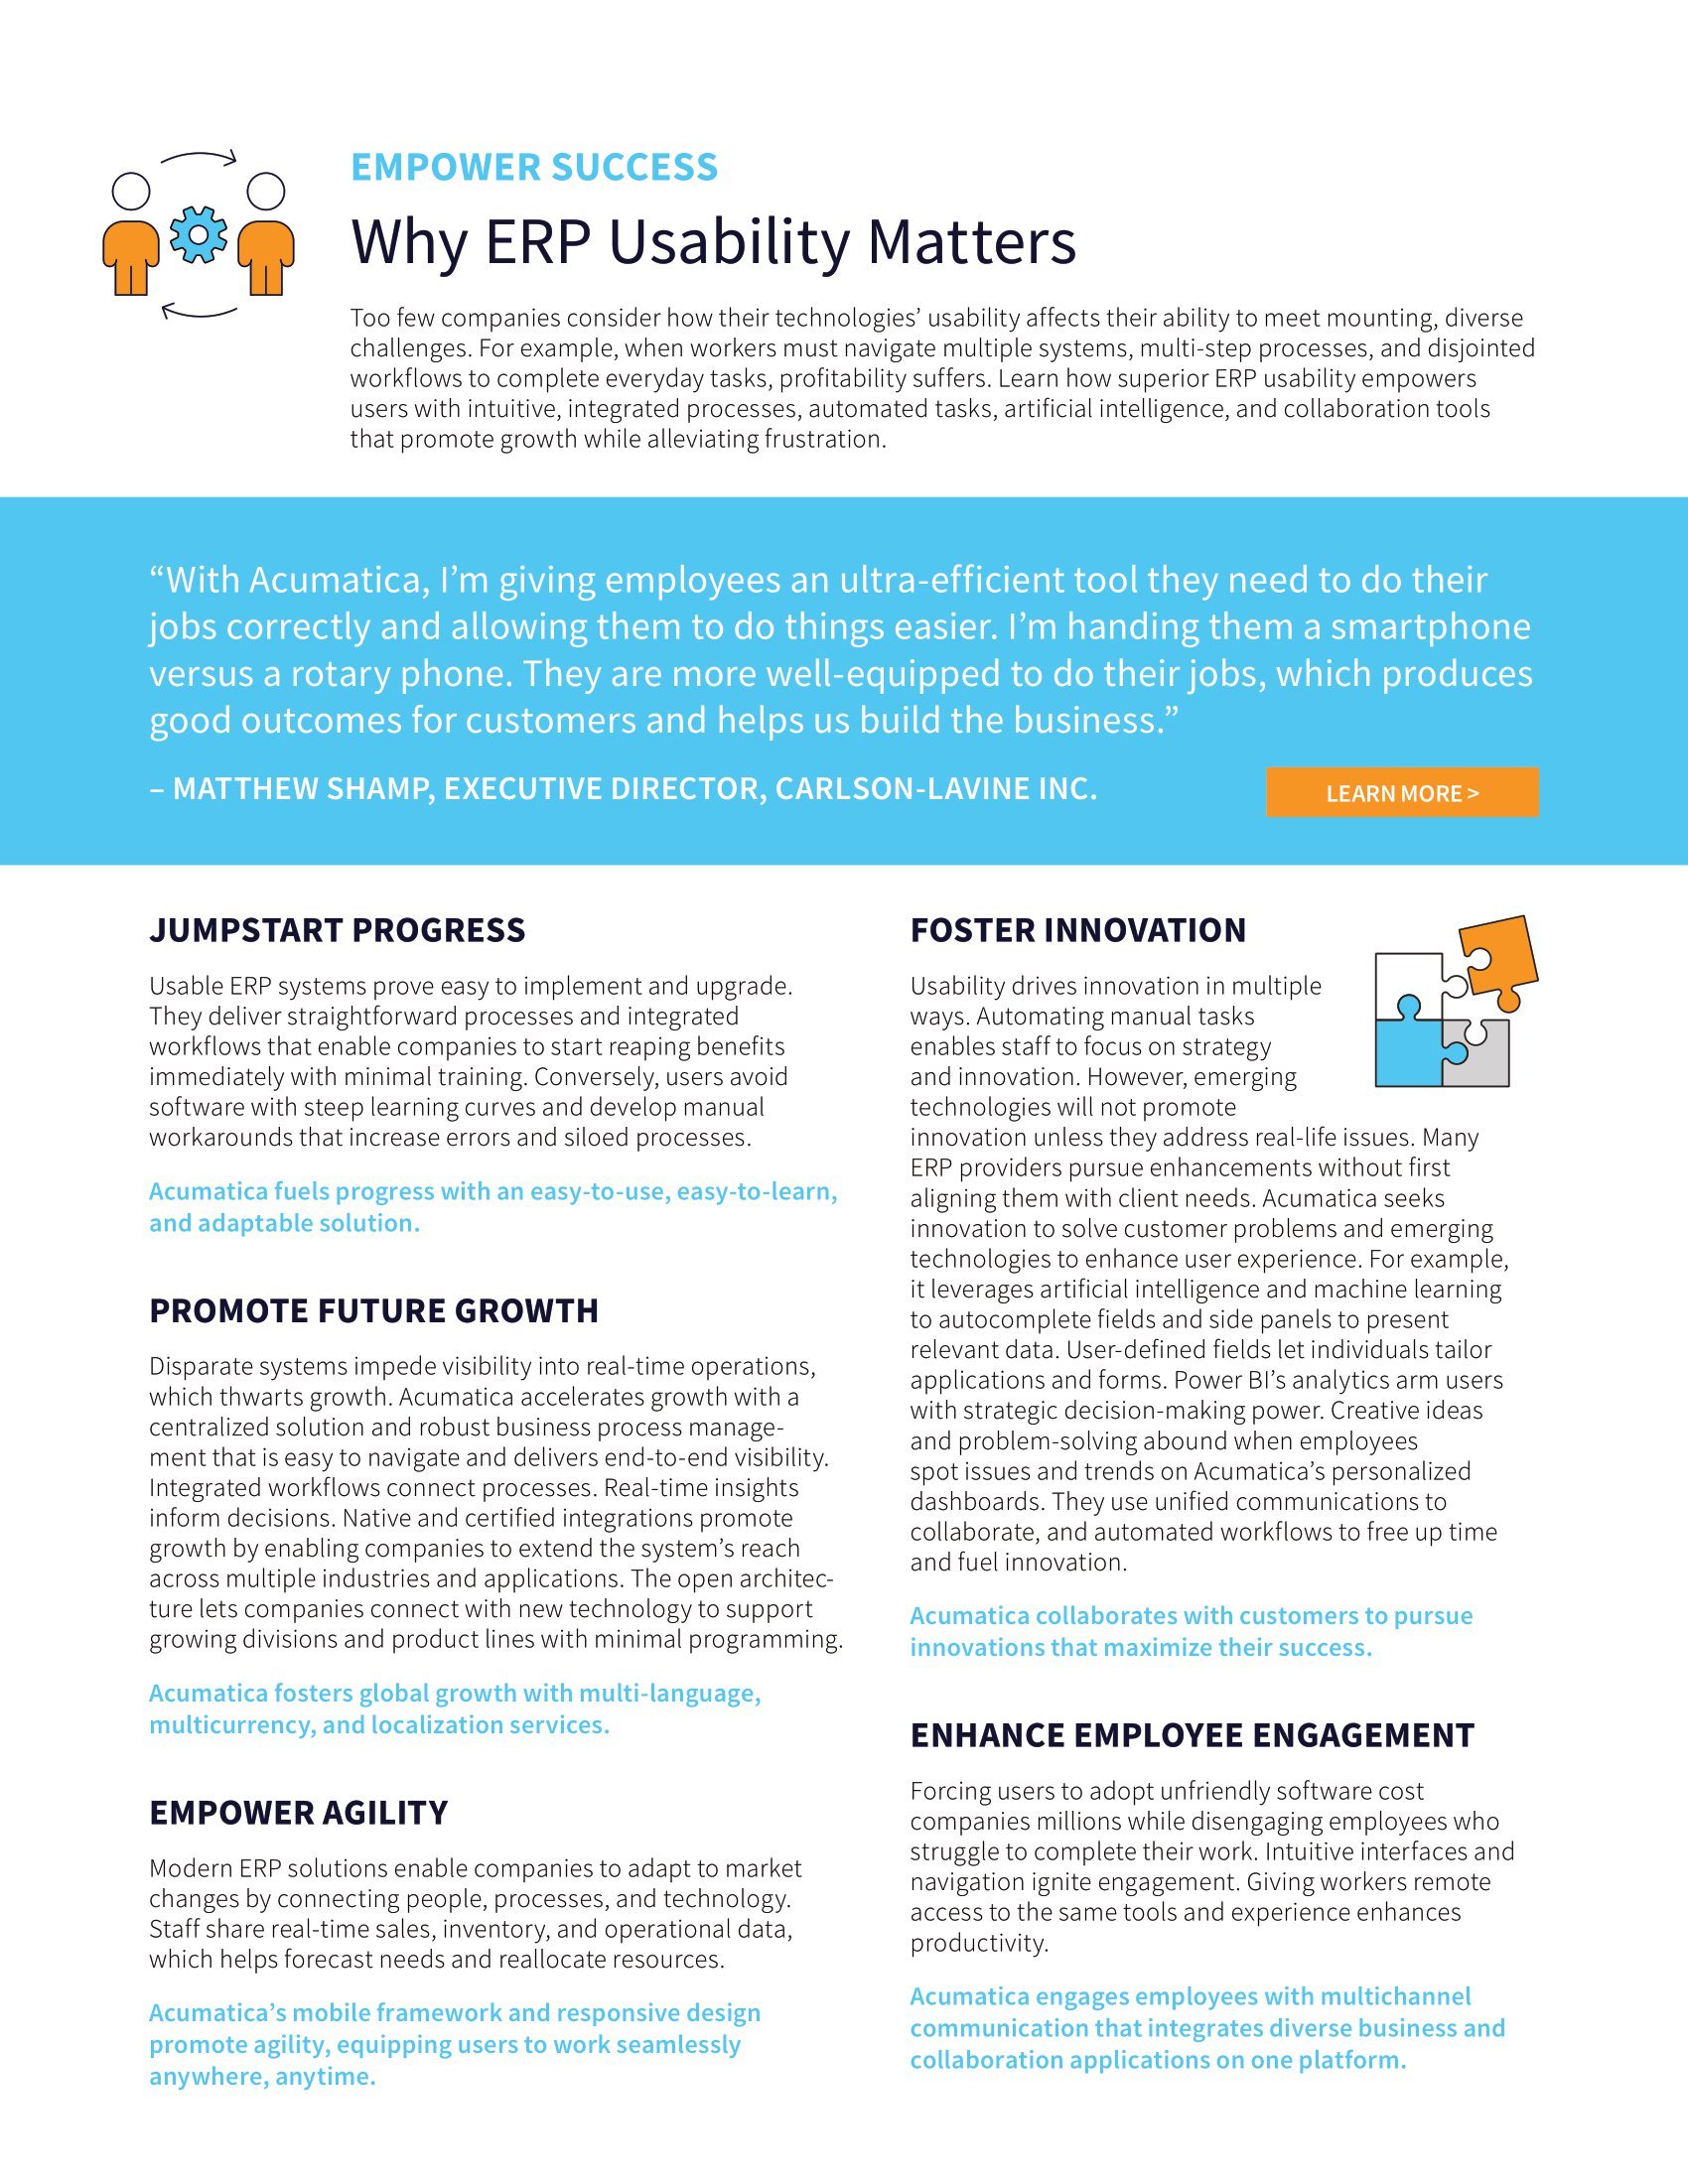 ERP Usability: Why It Matters, page 1